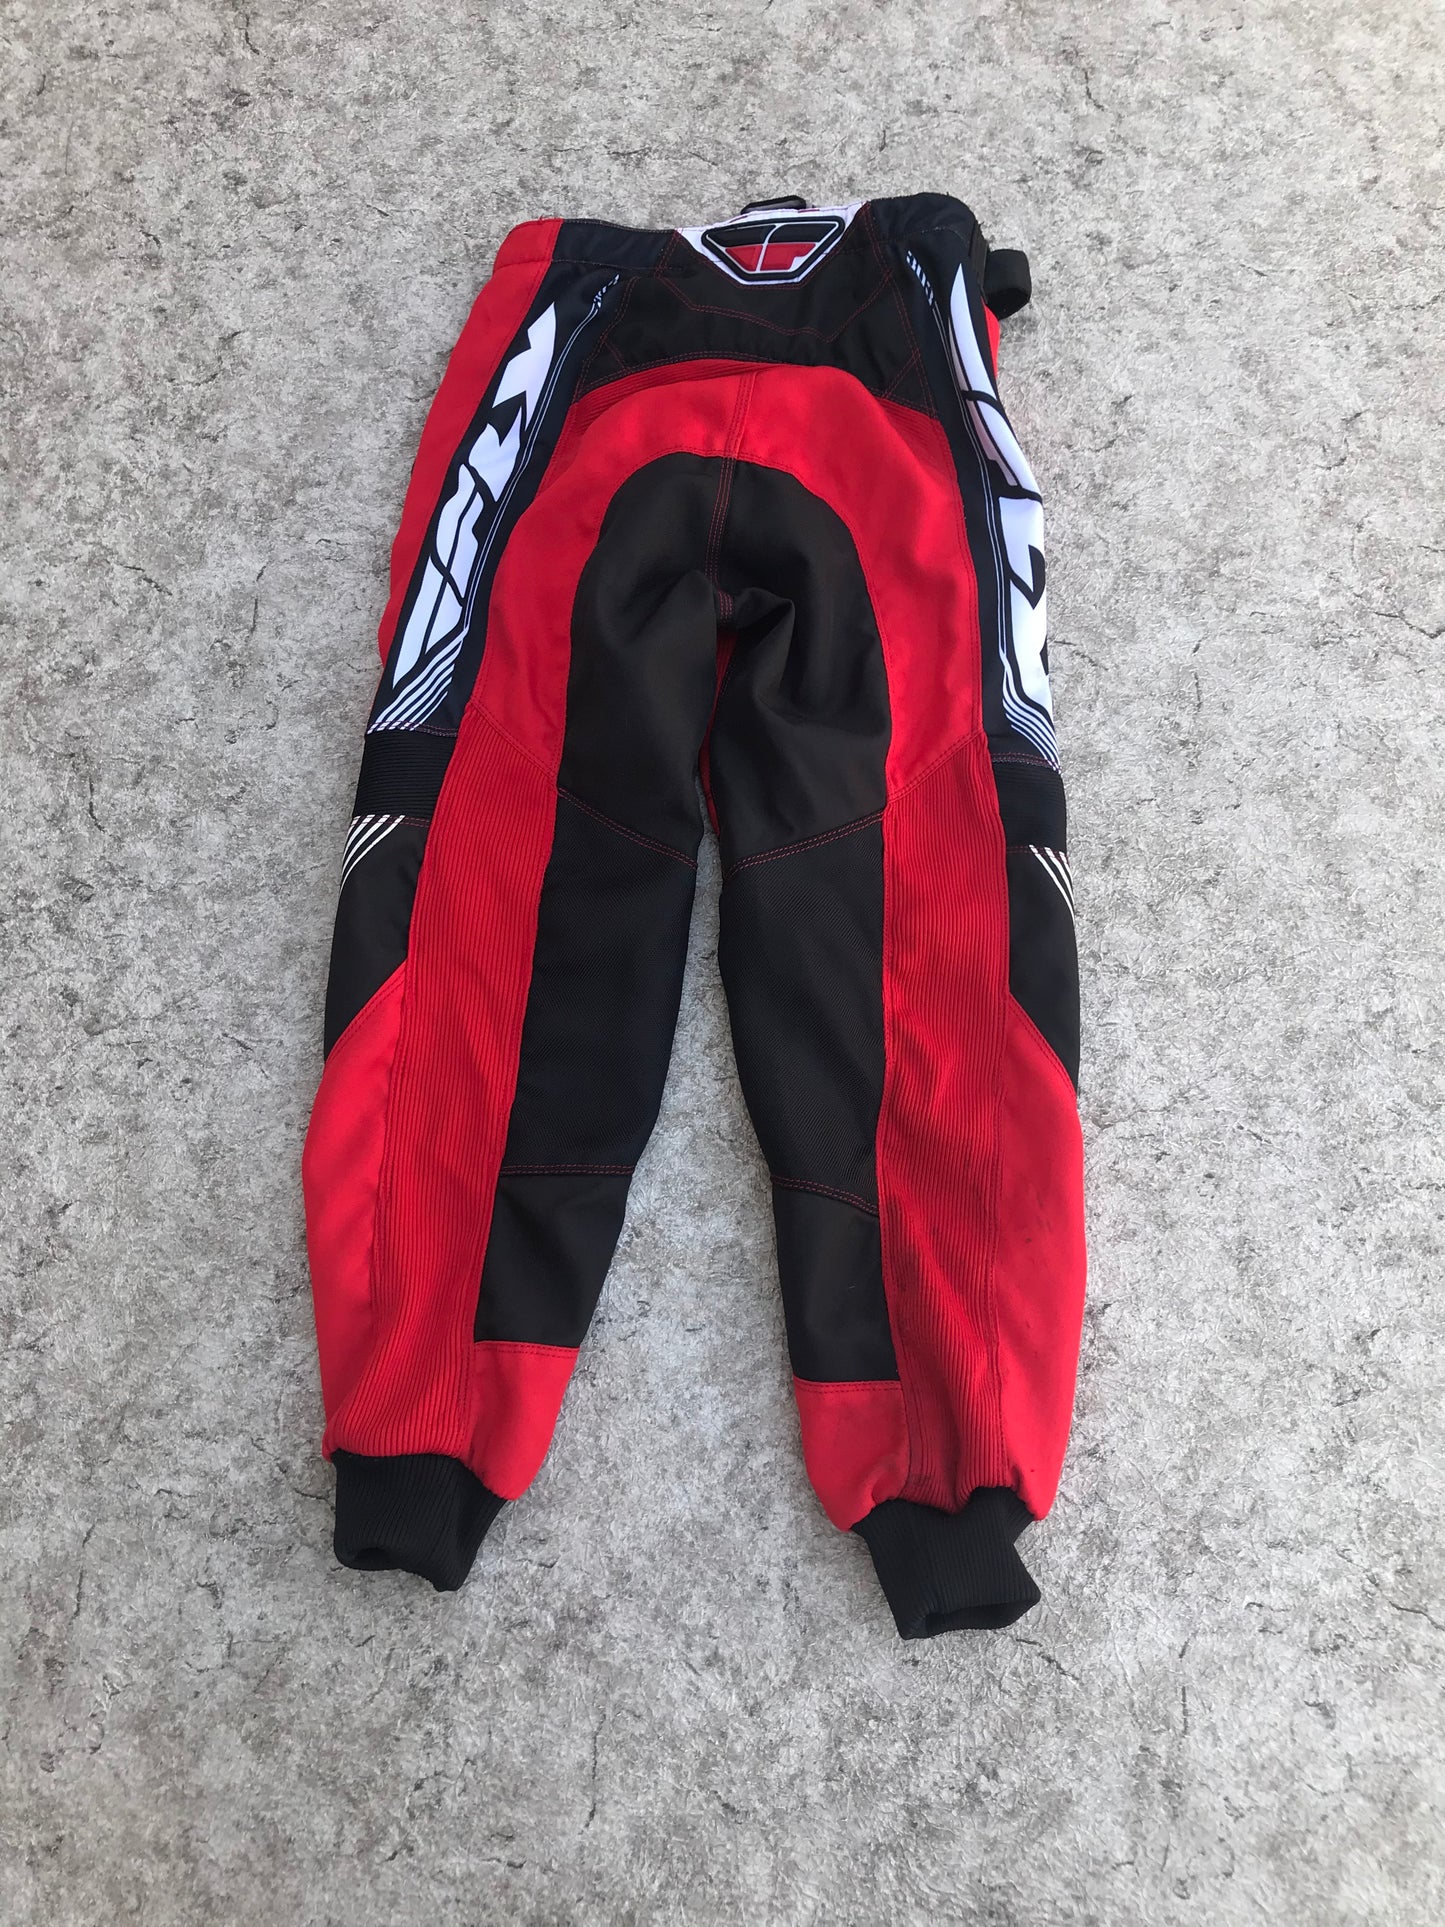 Motocross BMX Dirt Bike Pants Child Size 28 inch Size 14 Fly Racing Black Red